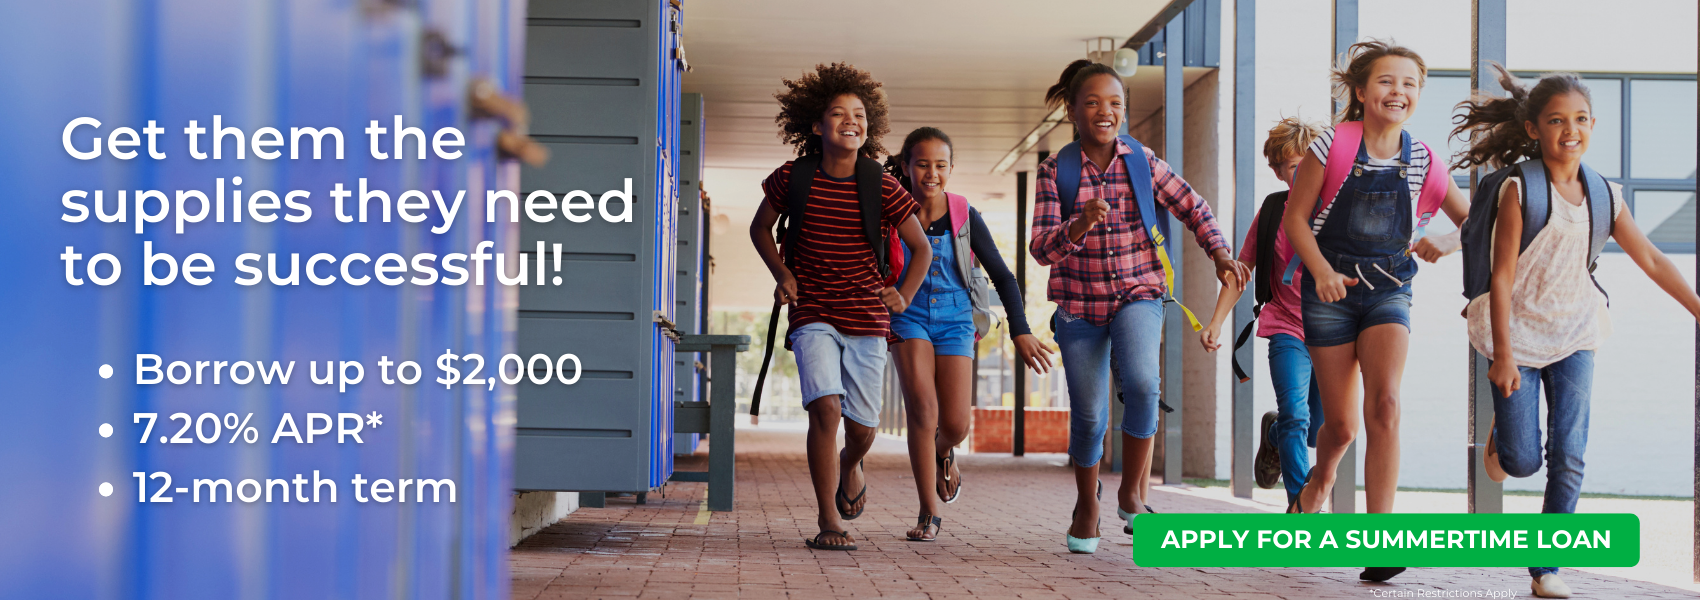 Get them the supplies they need to be successful! Borrow up to $2000. 7.20% APR. 12 month term. Certain restrictions apply. Click to apply for a summertime loan.